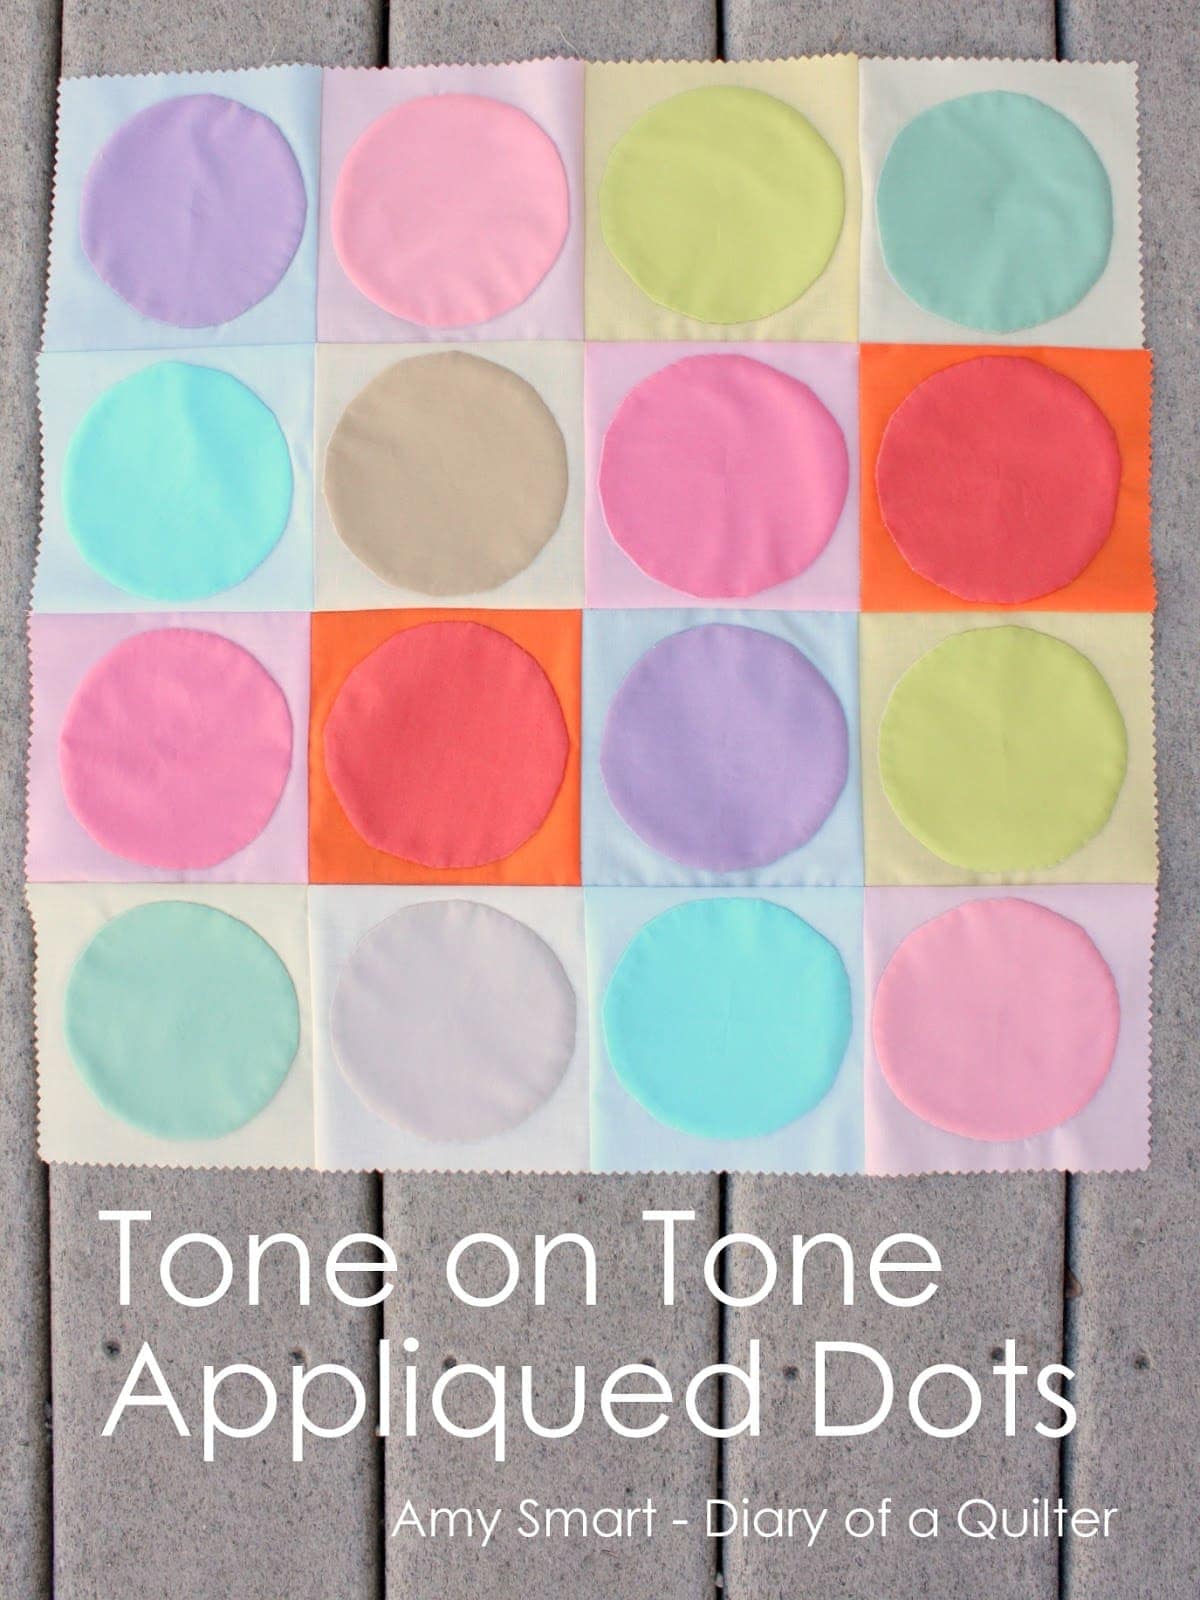 Tone on Tone Applique Dots by Diary of a Quilter